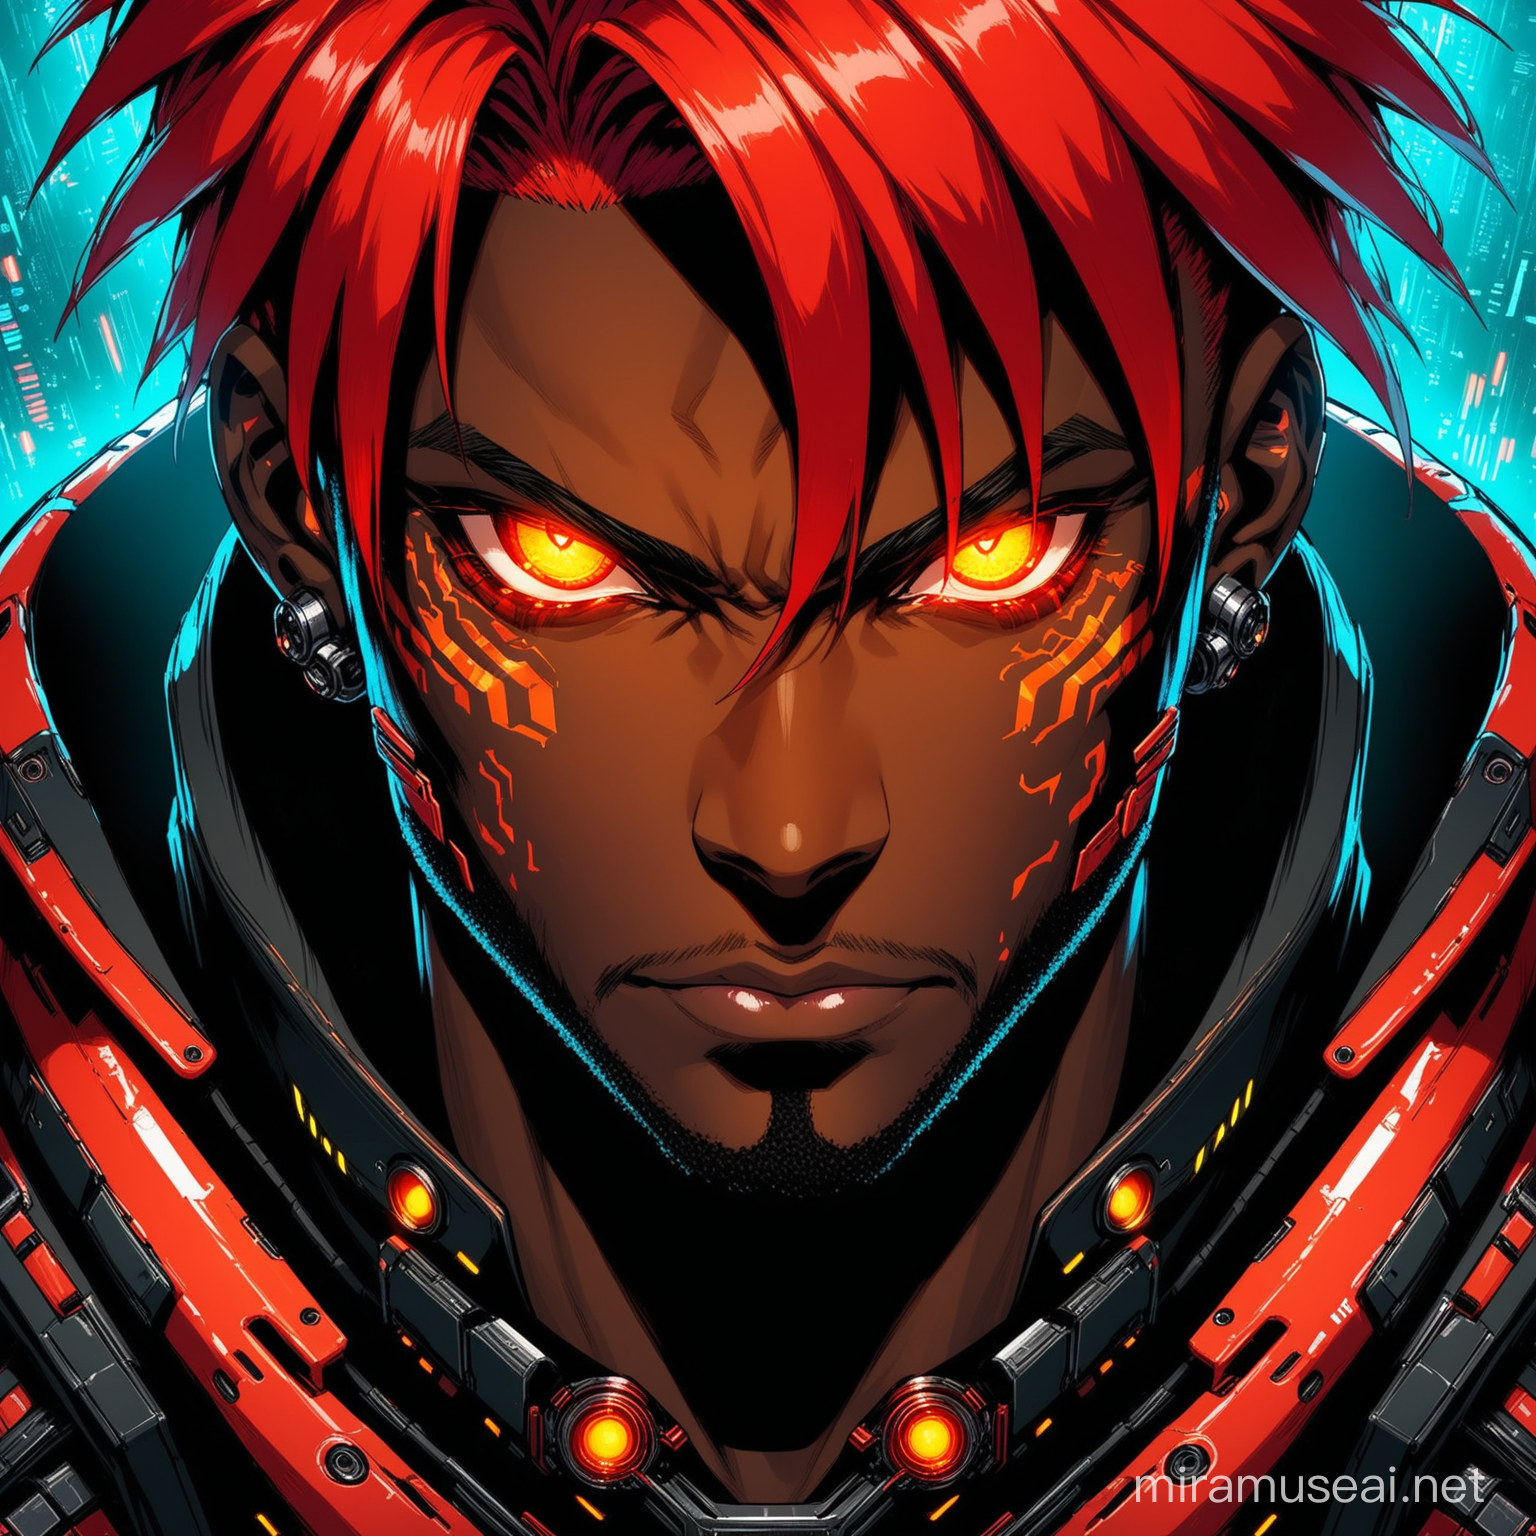 Create a close-up portrait of a strong, handsome dark-skinned man with fiery red hair and piercing red snake eyes. He wears Cyberpunk attire. Ensure precise detail in depicting his eyes.